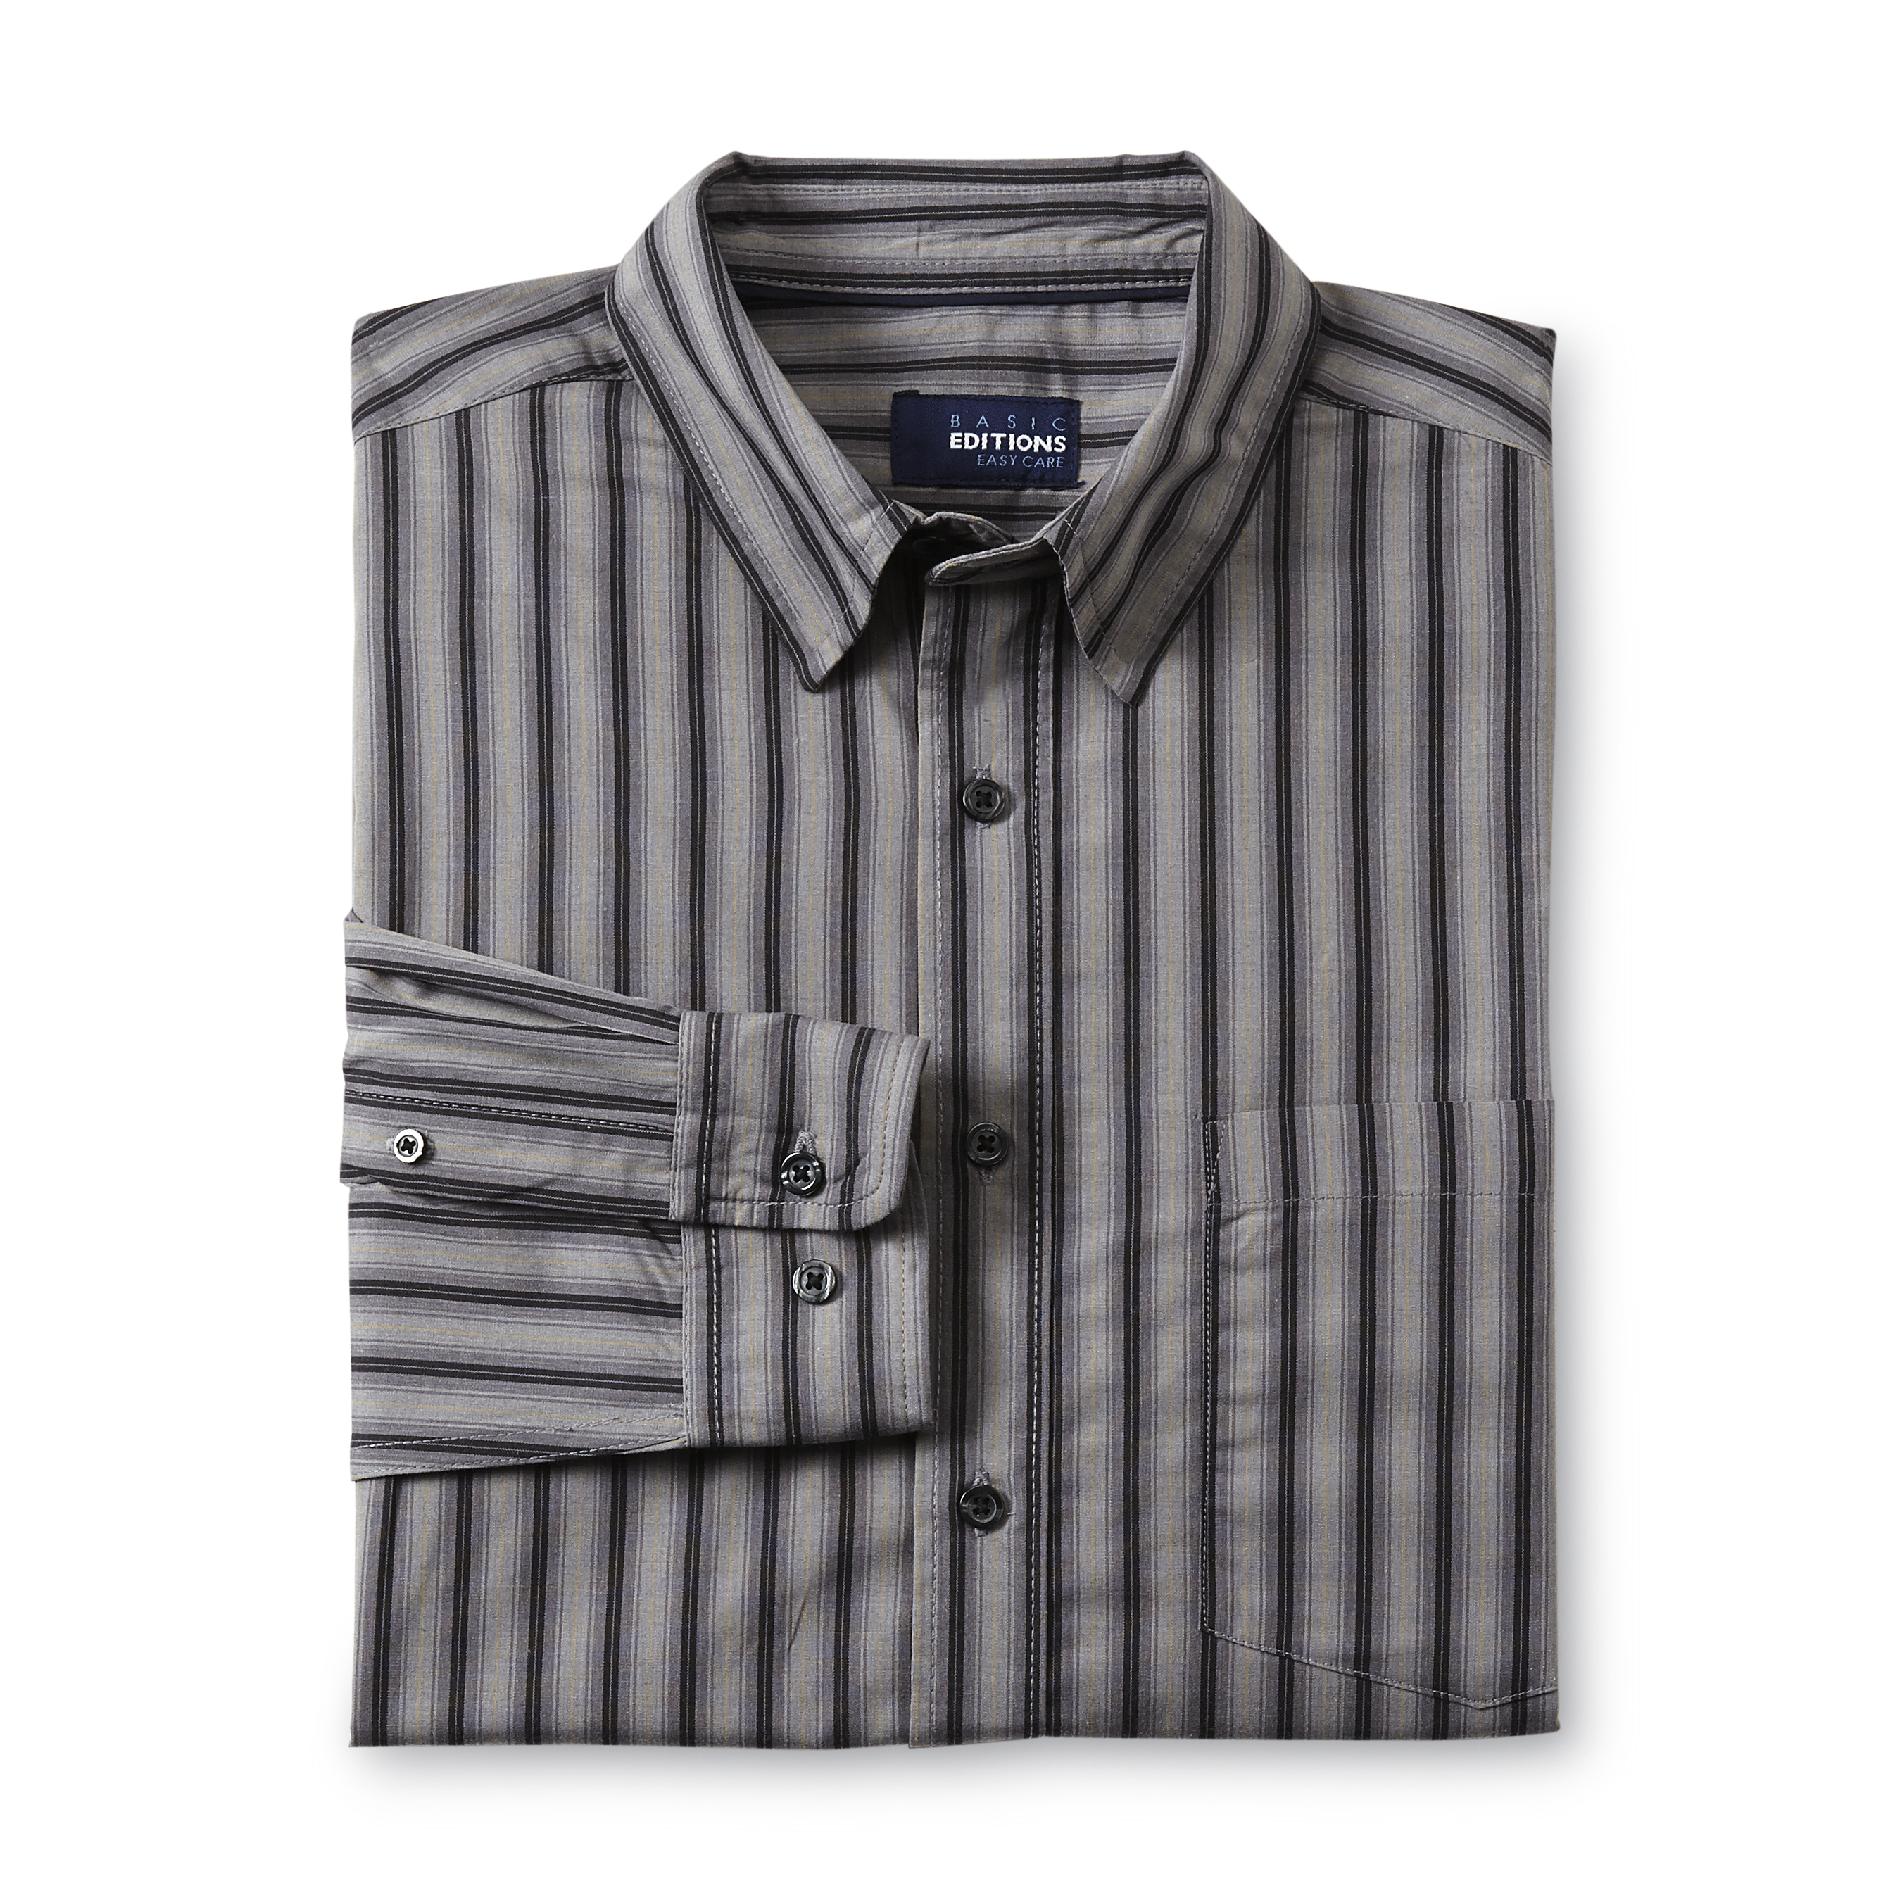 Basic Editions Men's Easy Care Dress Shirt - Striped